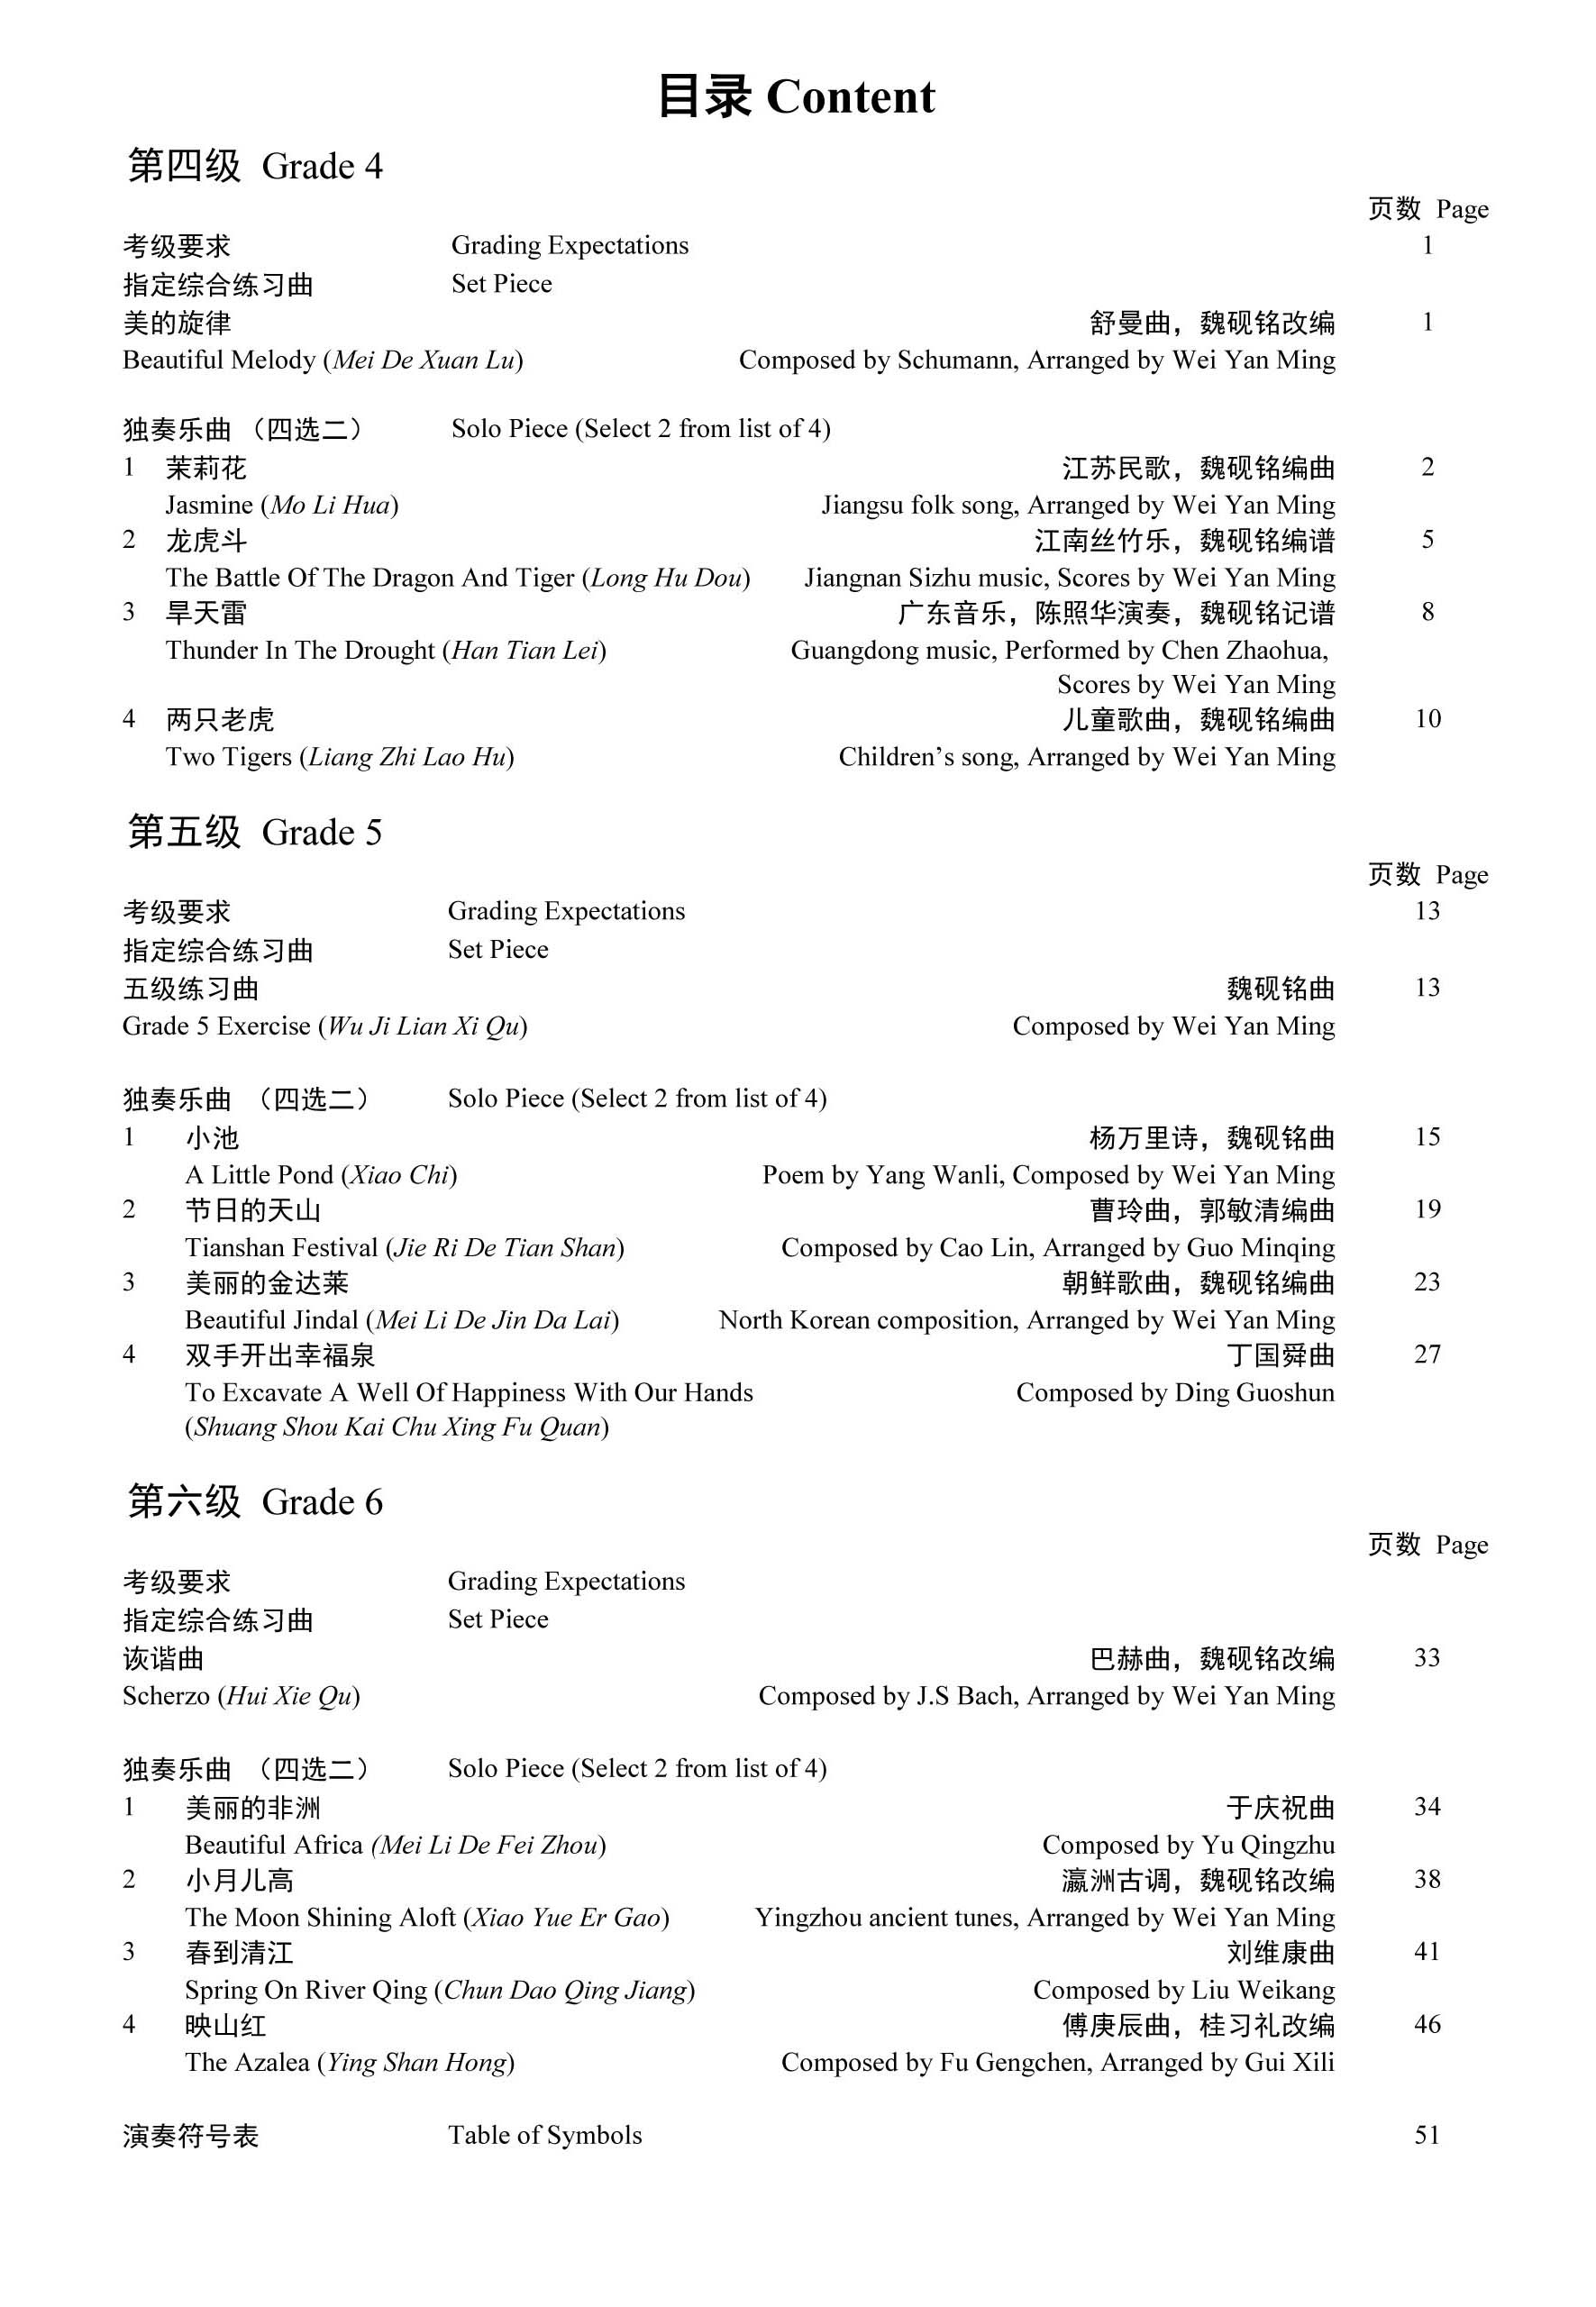 Yangqin Grading Examination Book by Teng (Intermediate Grade 4-6) Content Page